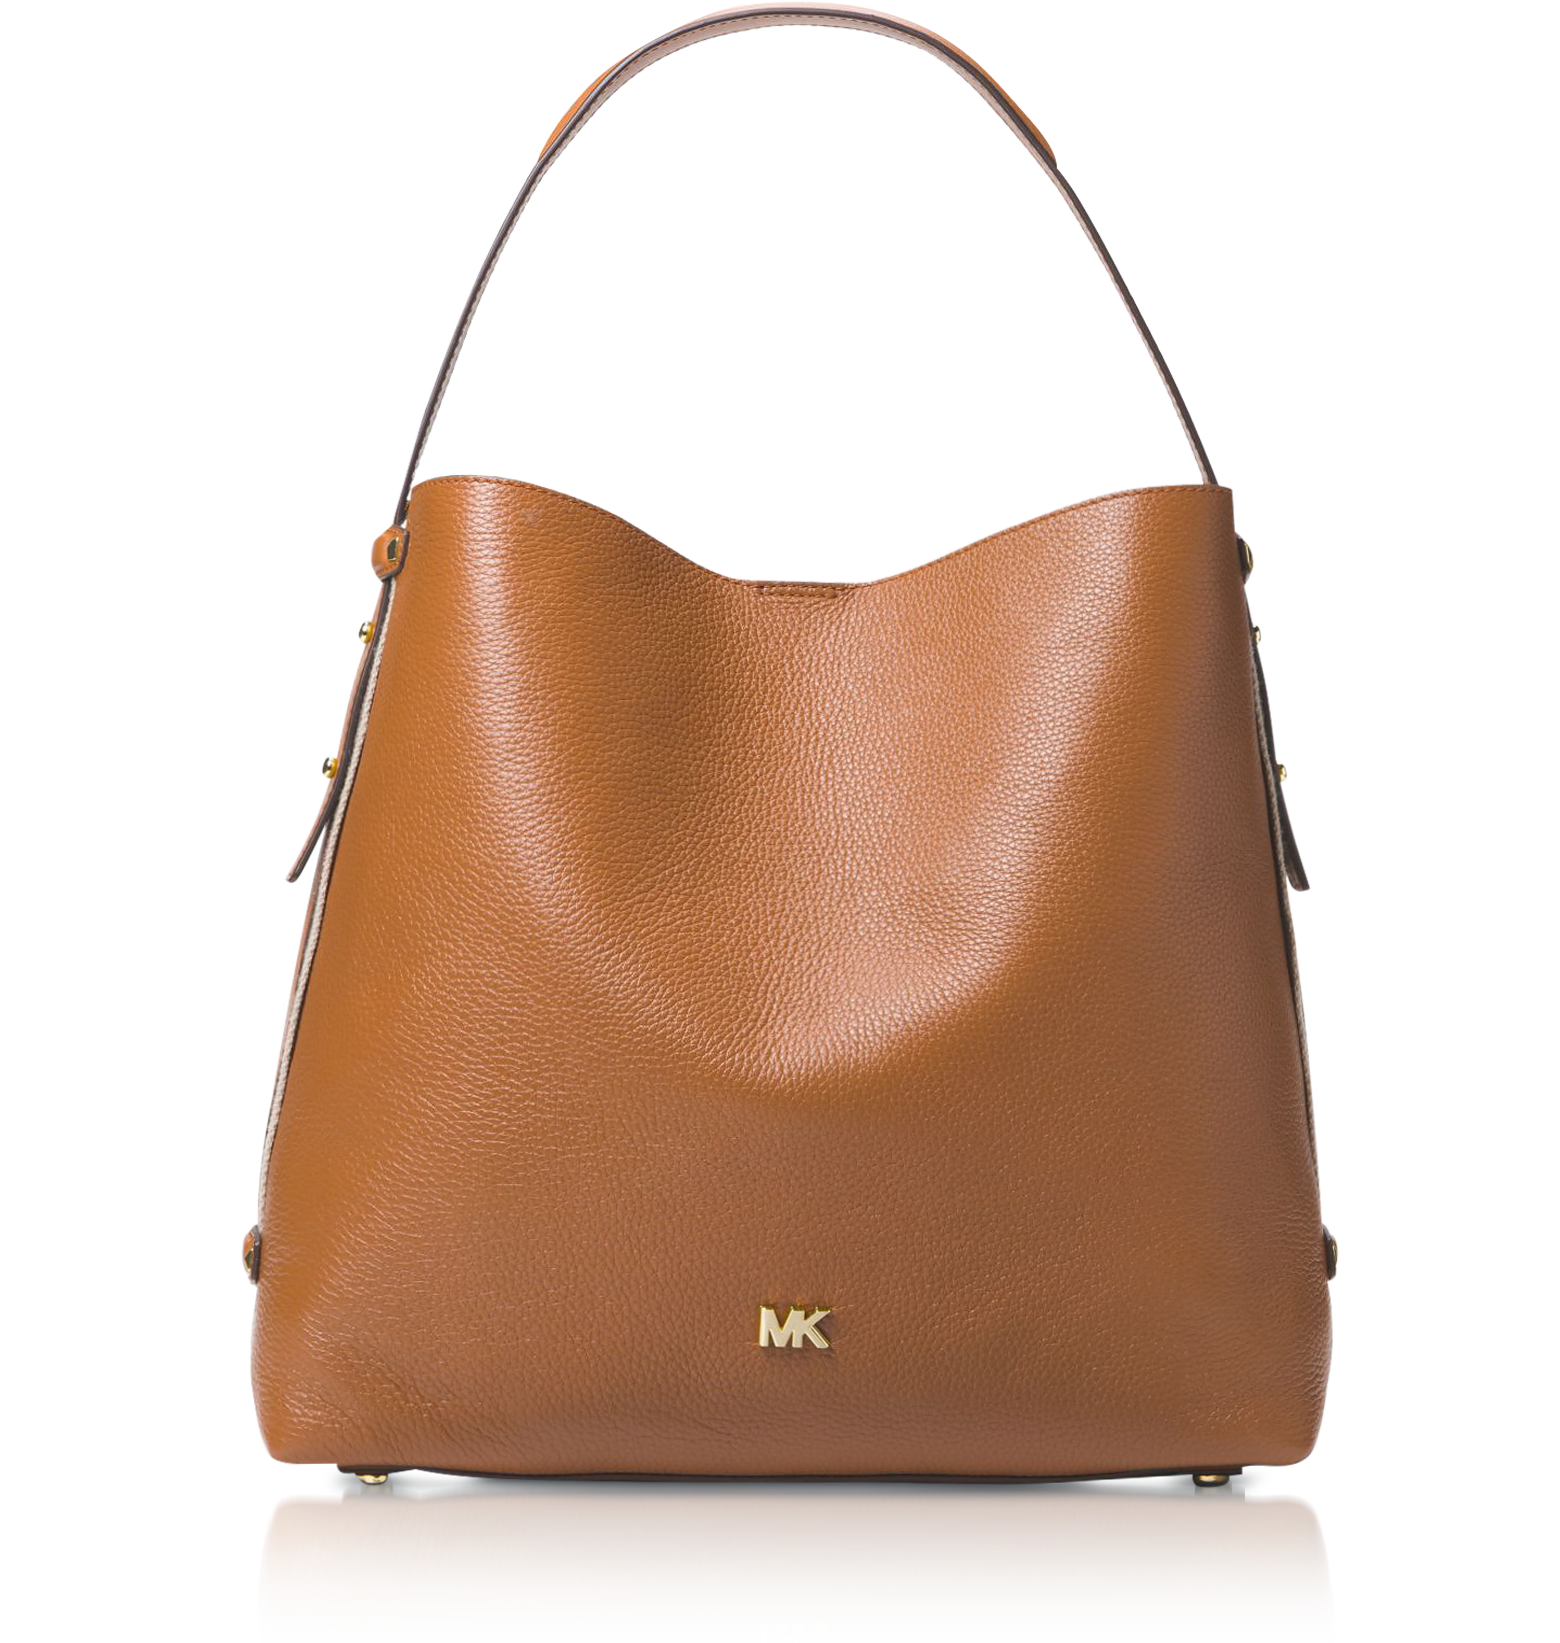 michael kors griffin large tote